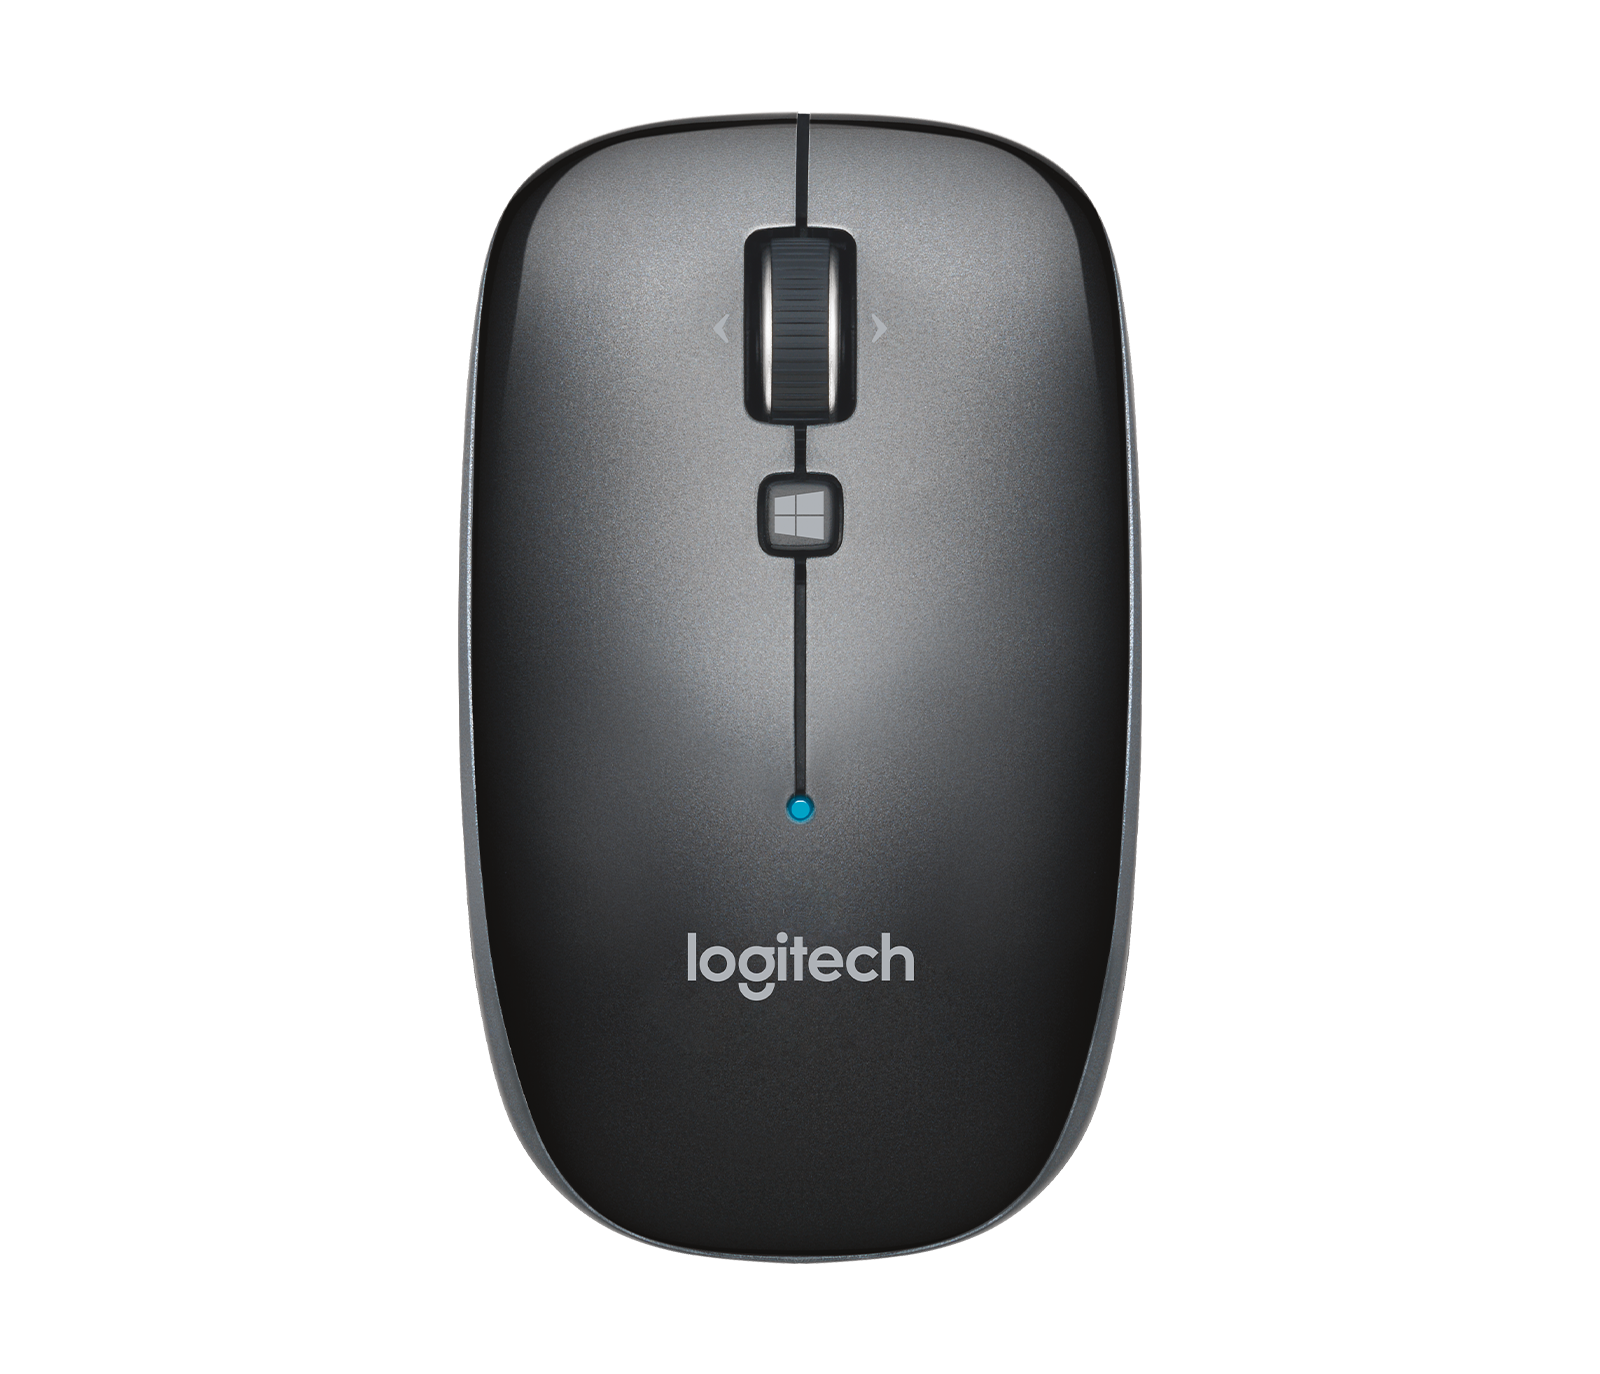 fersken Had Diplomat Logitech M557 Bluetooth Wireless Mouse with Multi OS Support